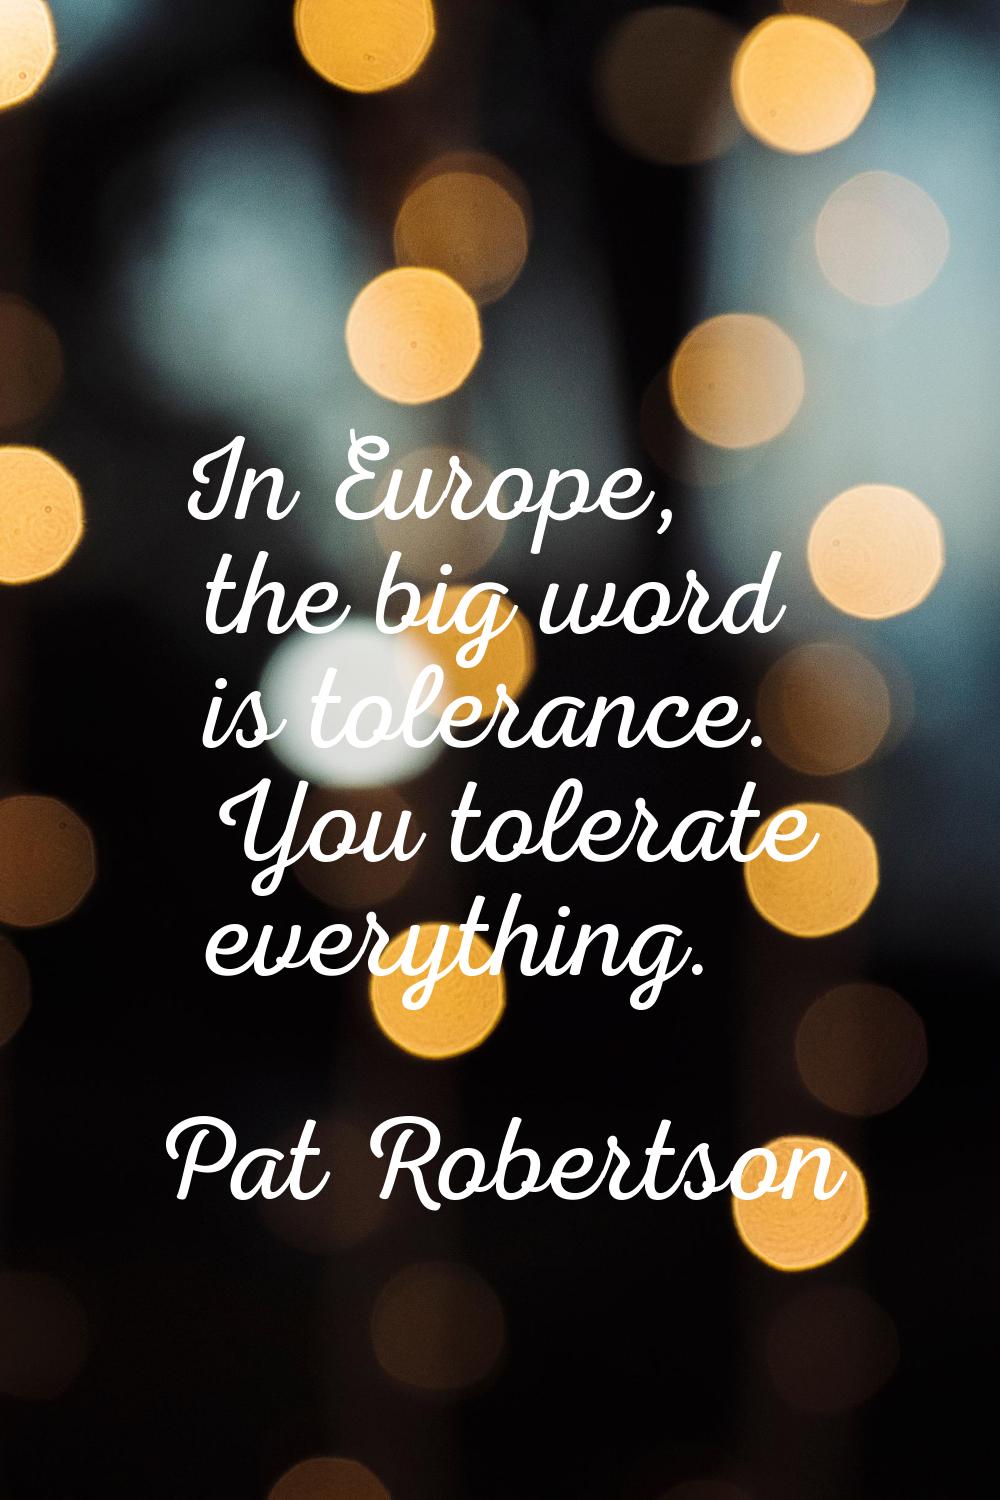 In Europe, the big word is tolerance. You tolerate everything.